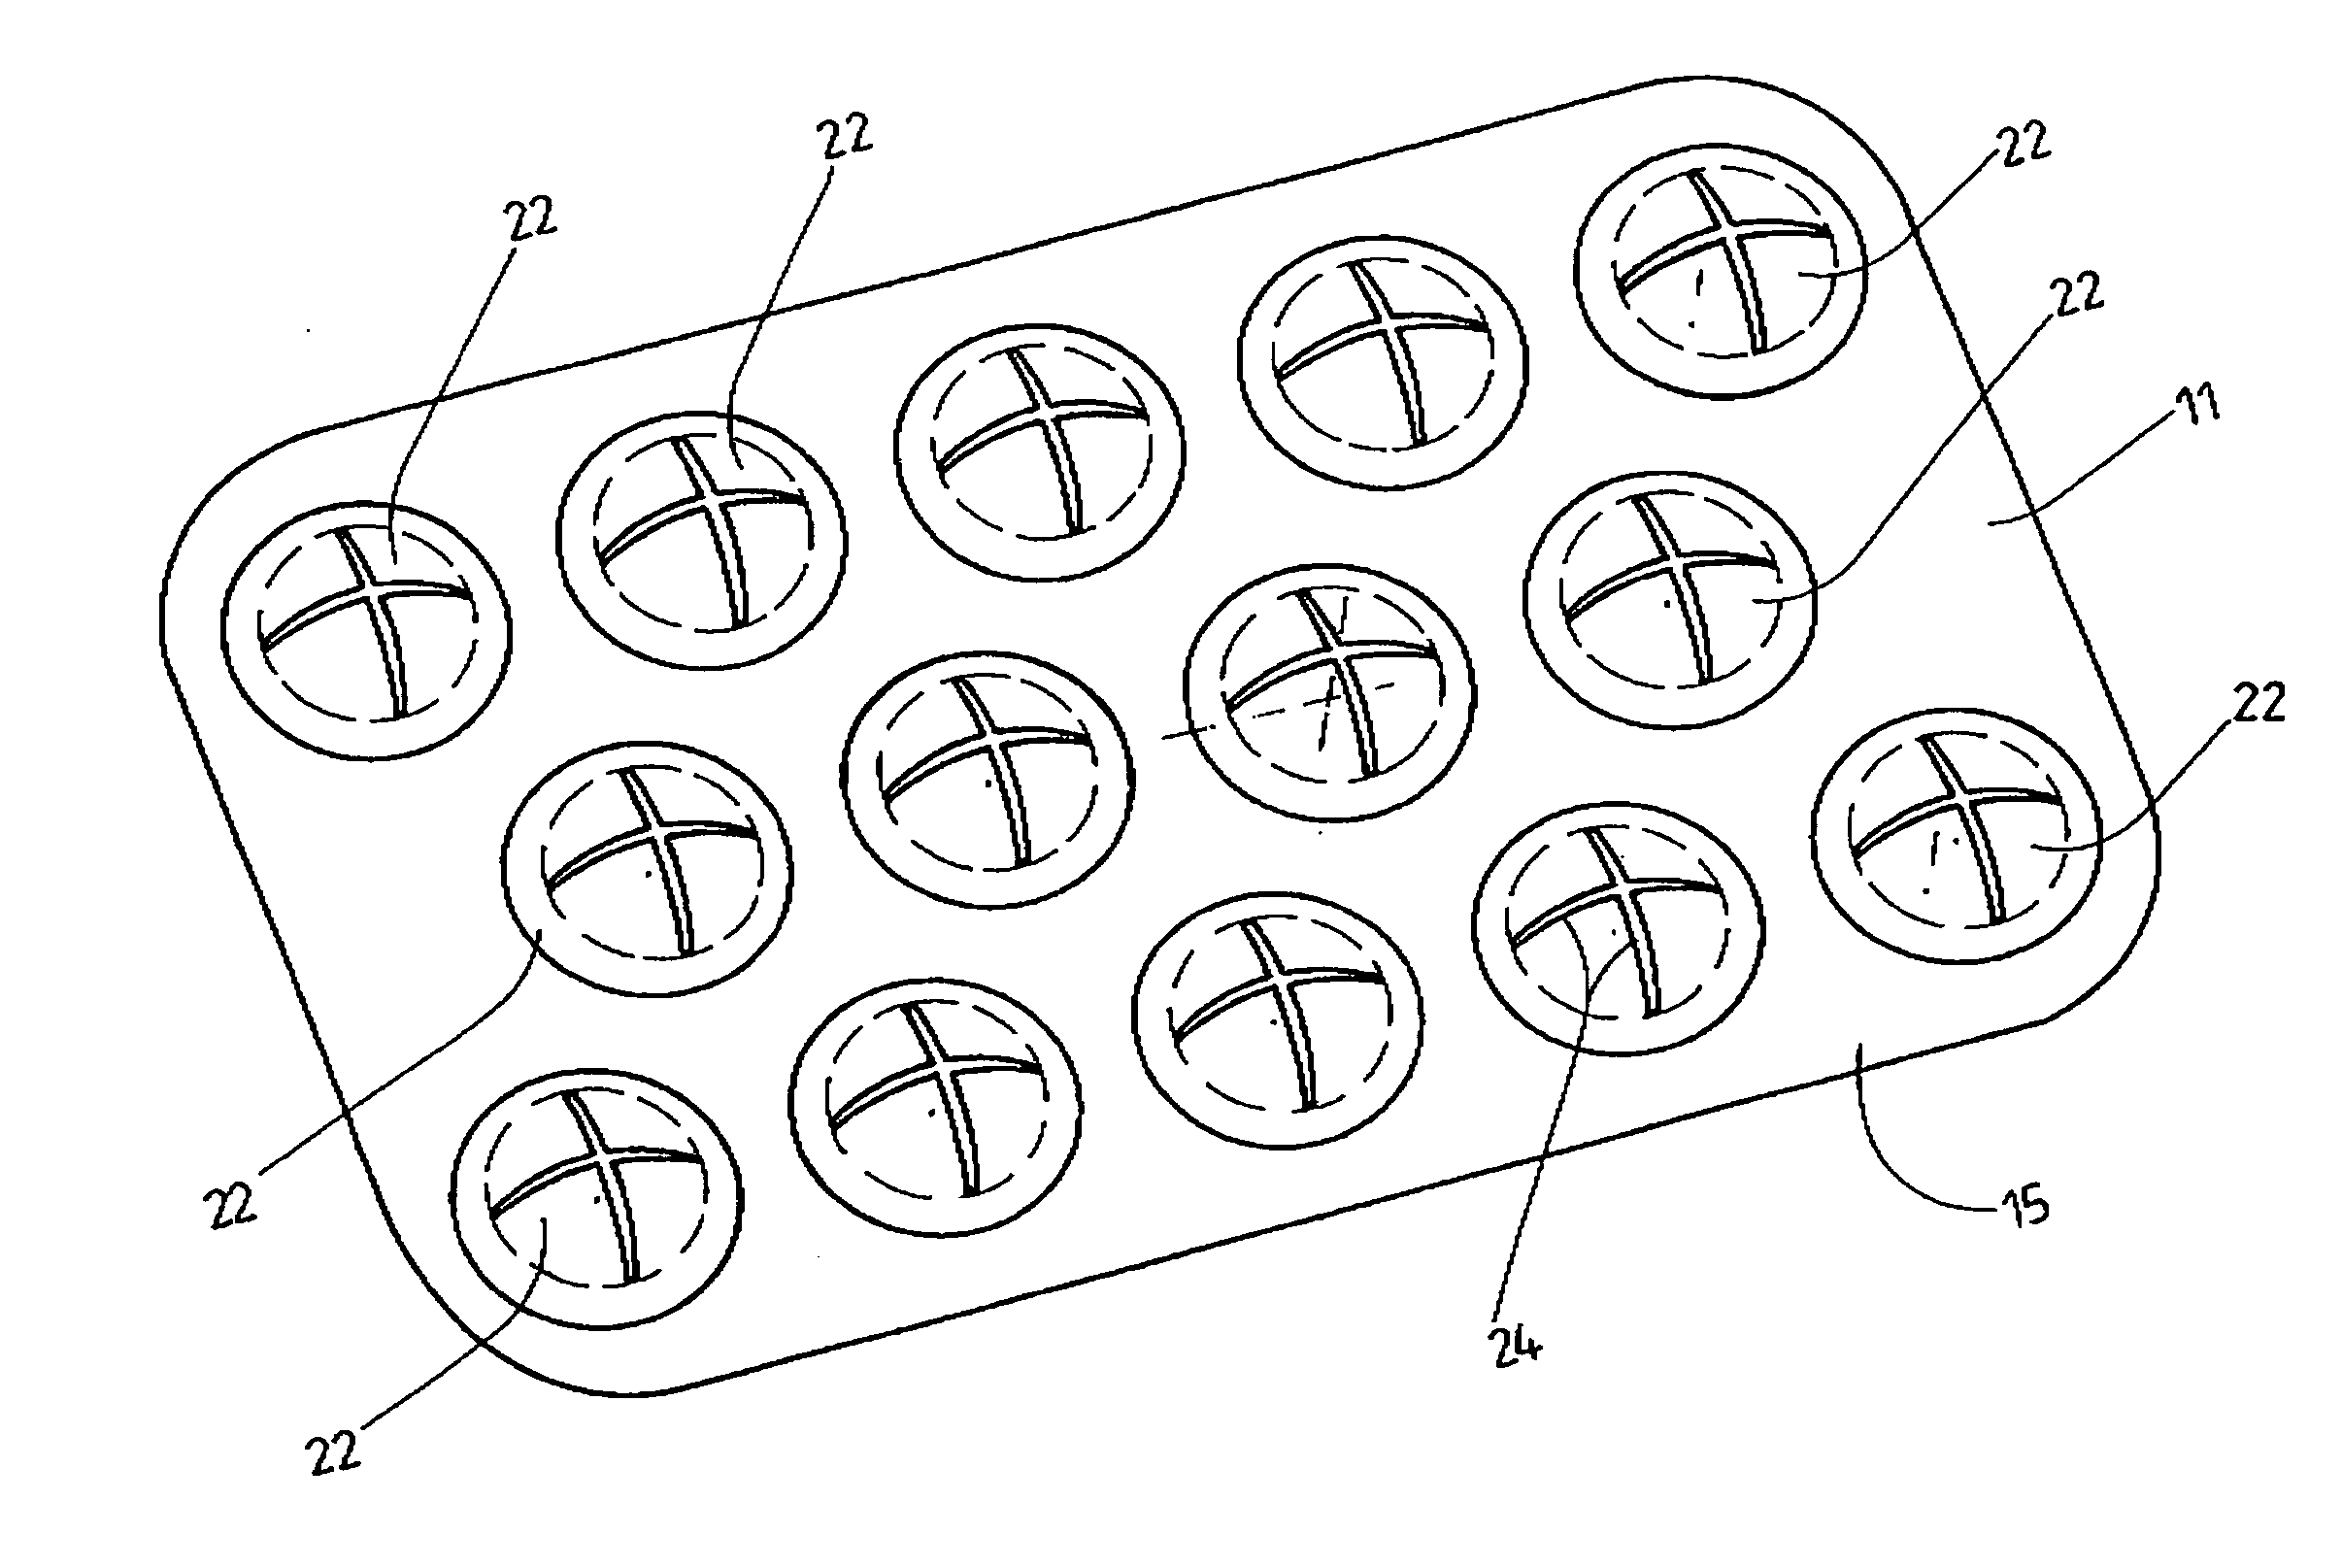 Device for generating pyrotechnic effects